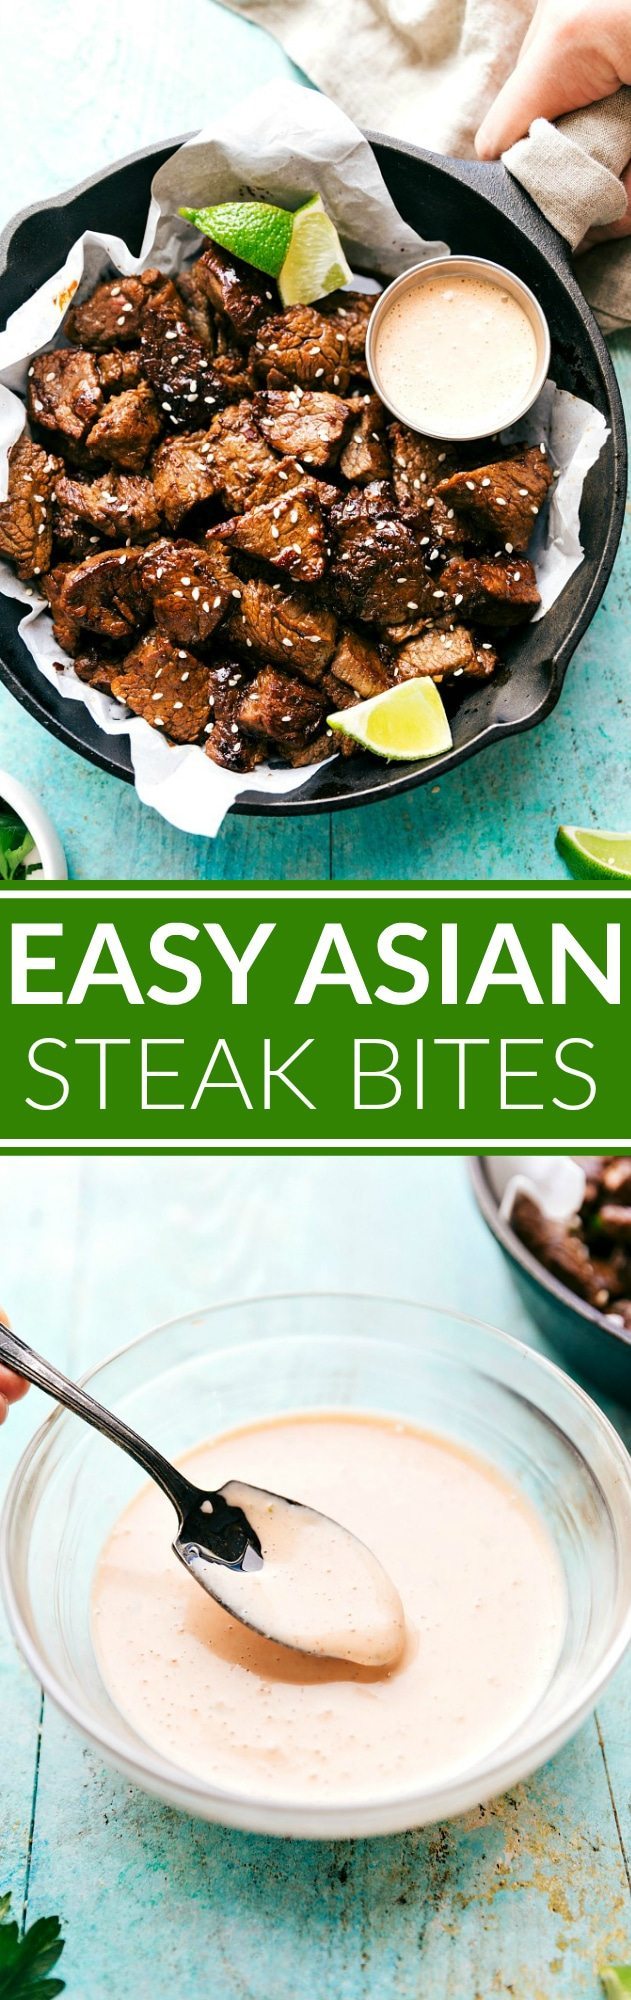 ASIAN STEAK BITES! Easy to make Asian steak bites -- ready in 30 minutes or less! Plus an insanely good dipping sauce that requires only four ingredients! I chelseasmessyapron.com